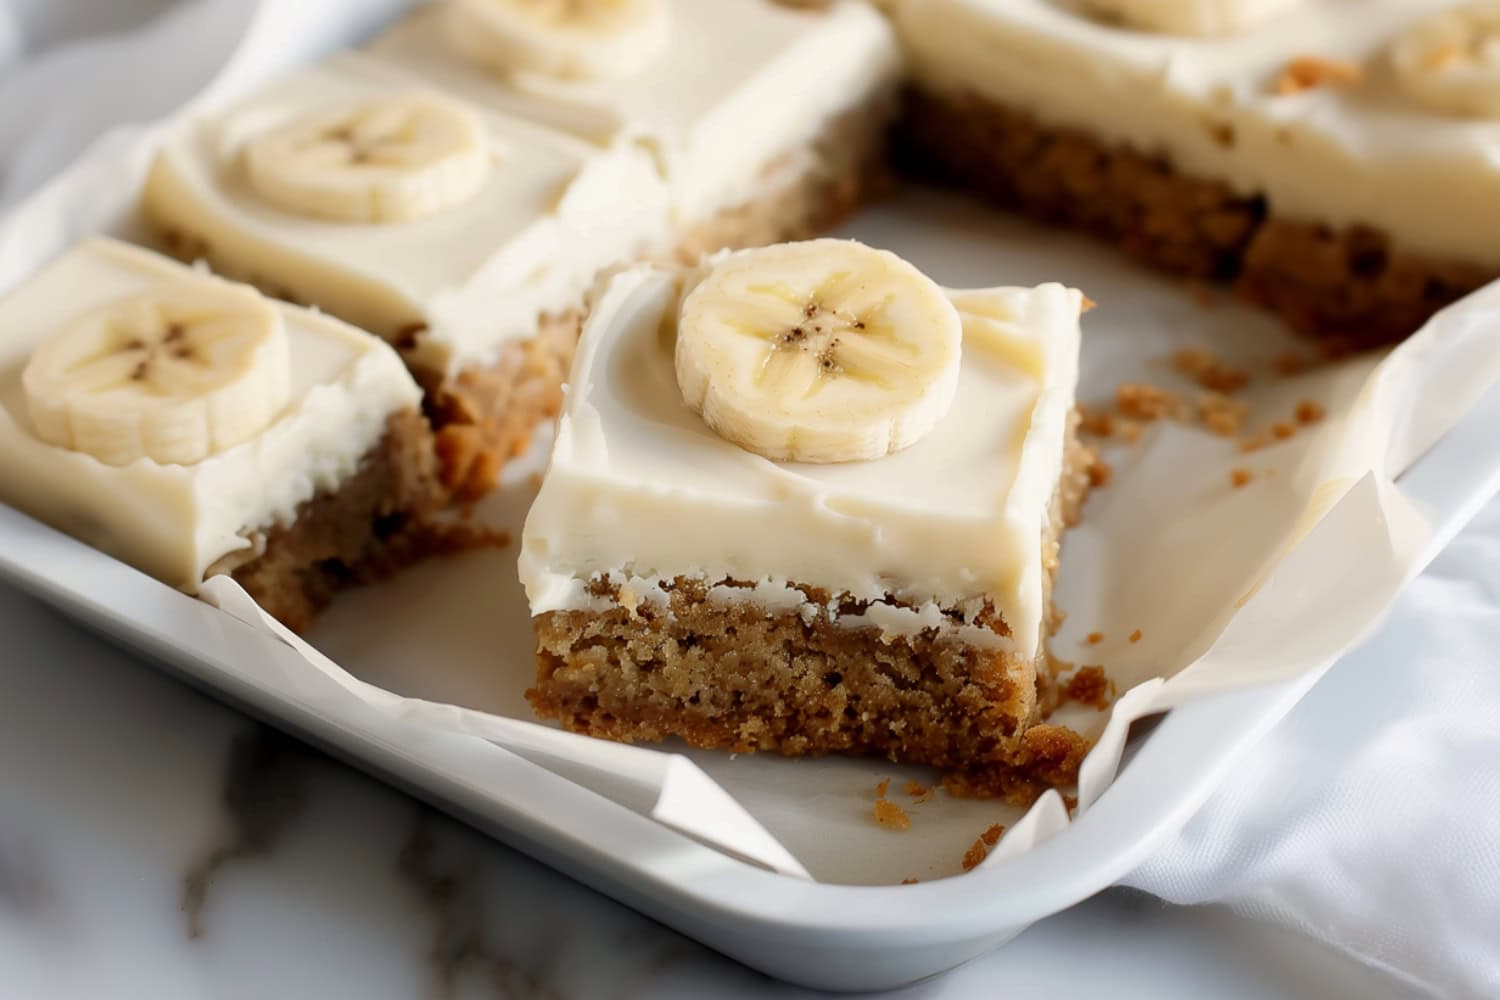 Freshly baked banana cake with a golden brown crust topped with cream cheese frosting.